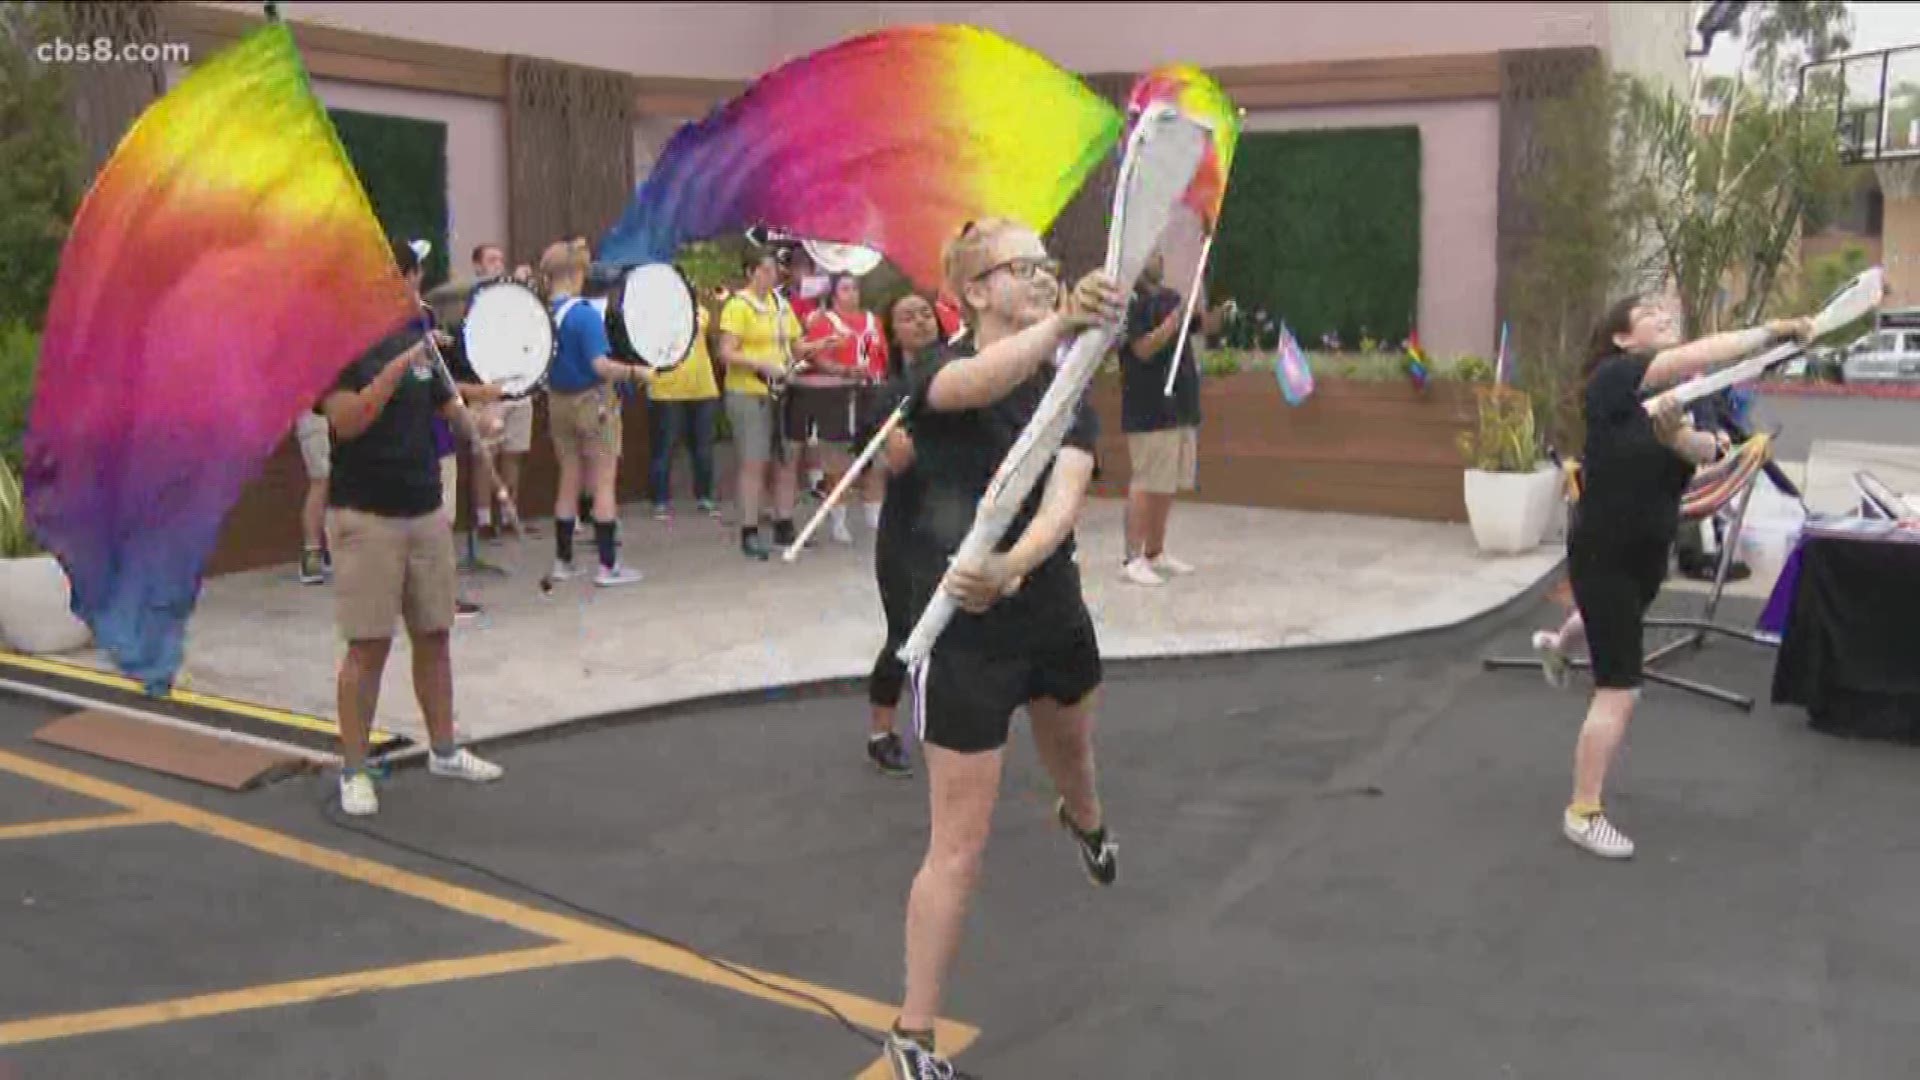 Locals are gearing up for a big weekend in San Diego. Saturday is the annual San Diego Pride Parade and the Pride festival will be held Saturday and Sunday. The LGBTQ youth marching band who will perform in the parade stopped by Morning Extra with a preview.